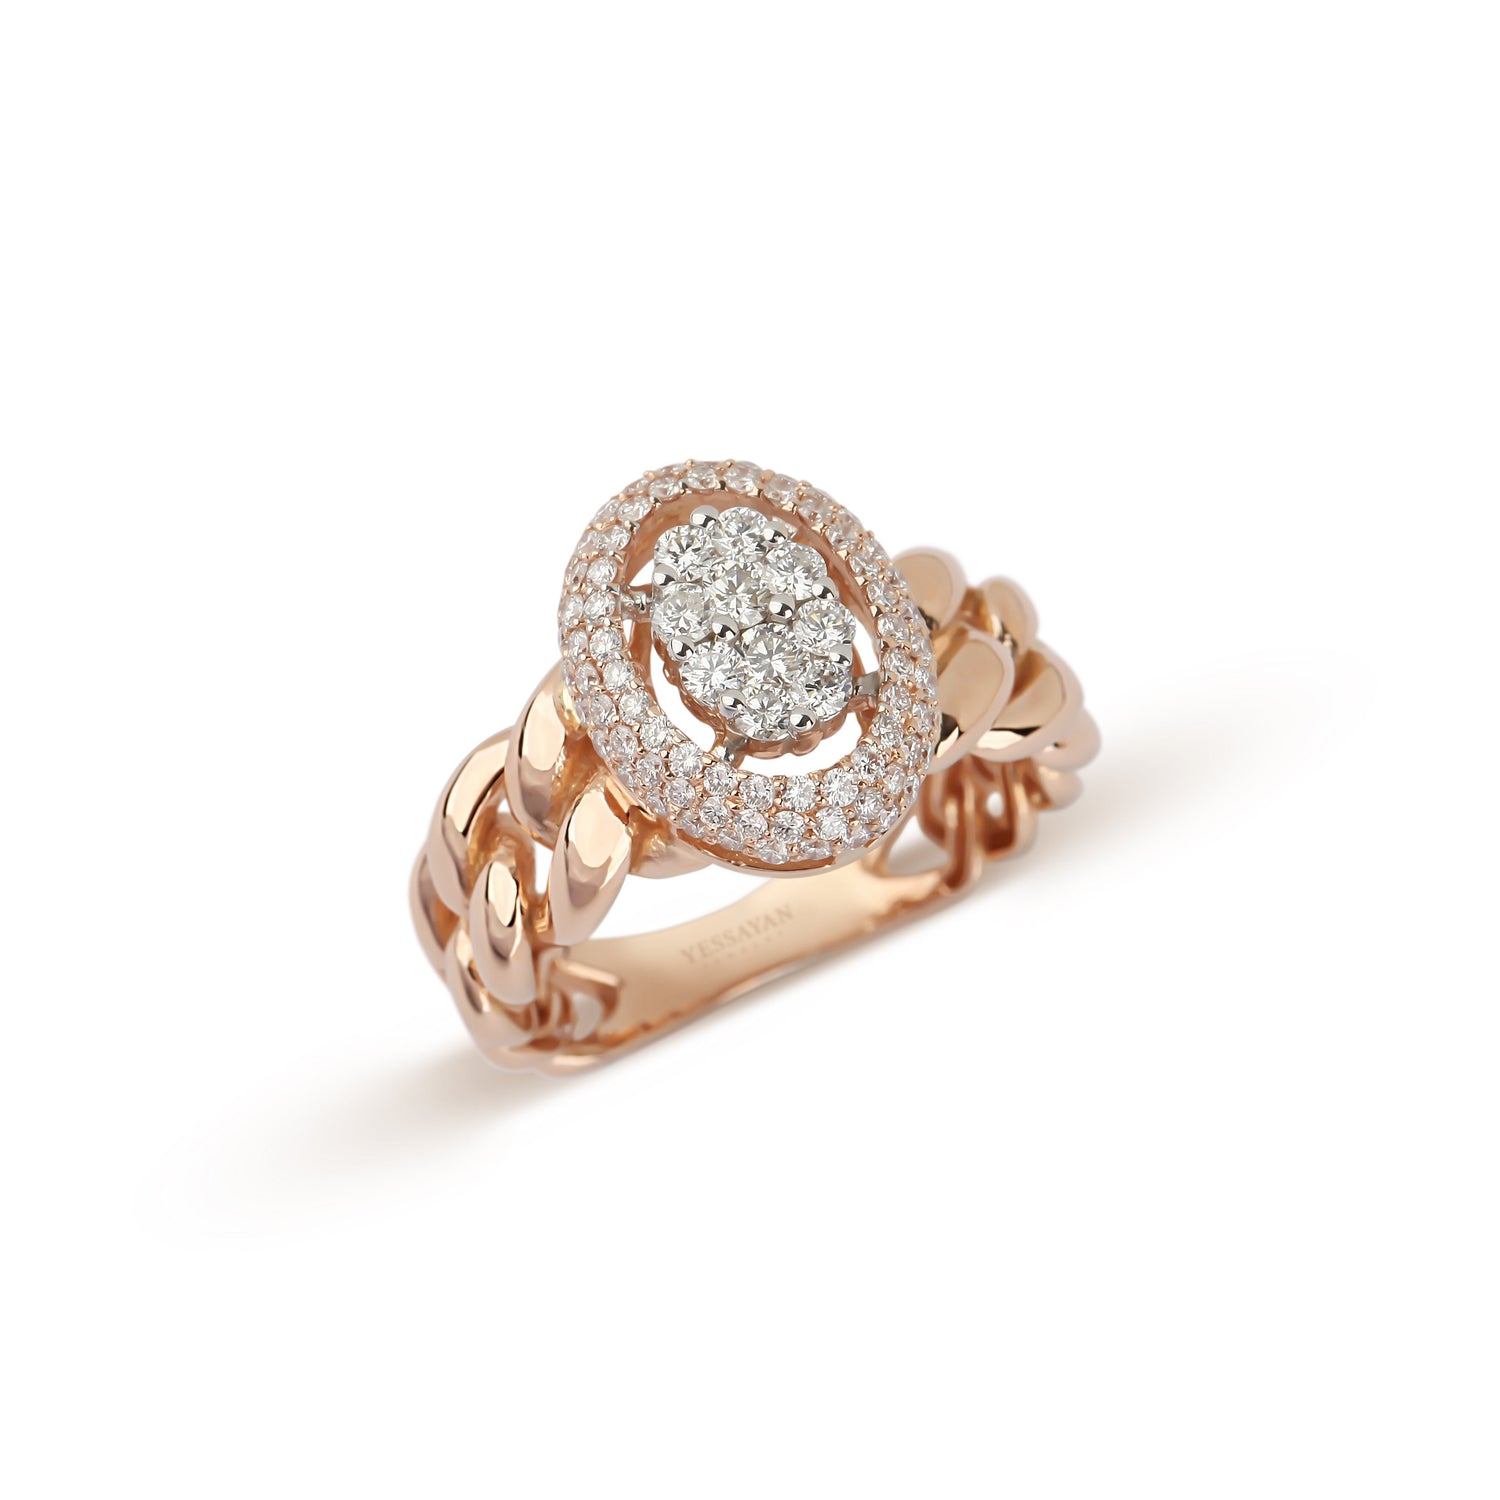 Rose Gold Illusion Diamond Ring | Jewelry online | Solitaire ring